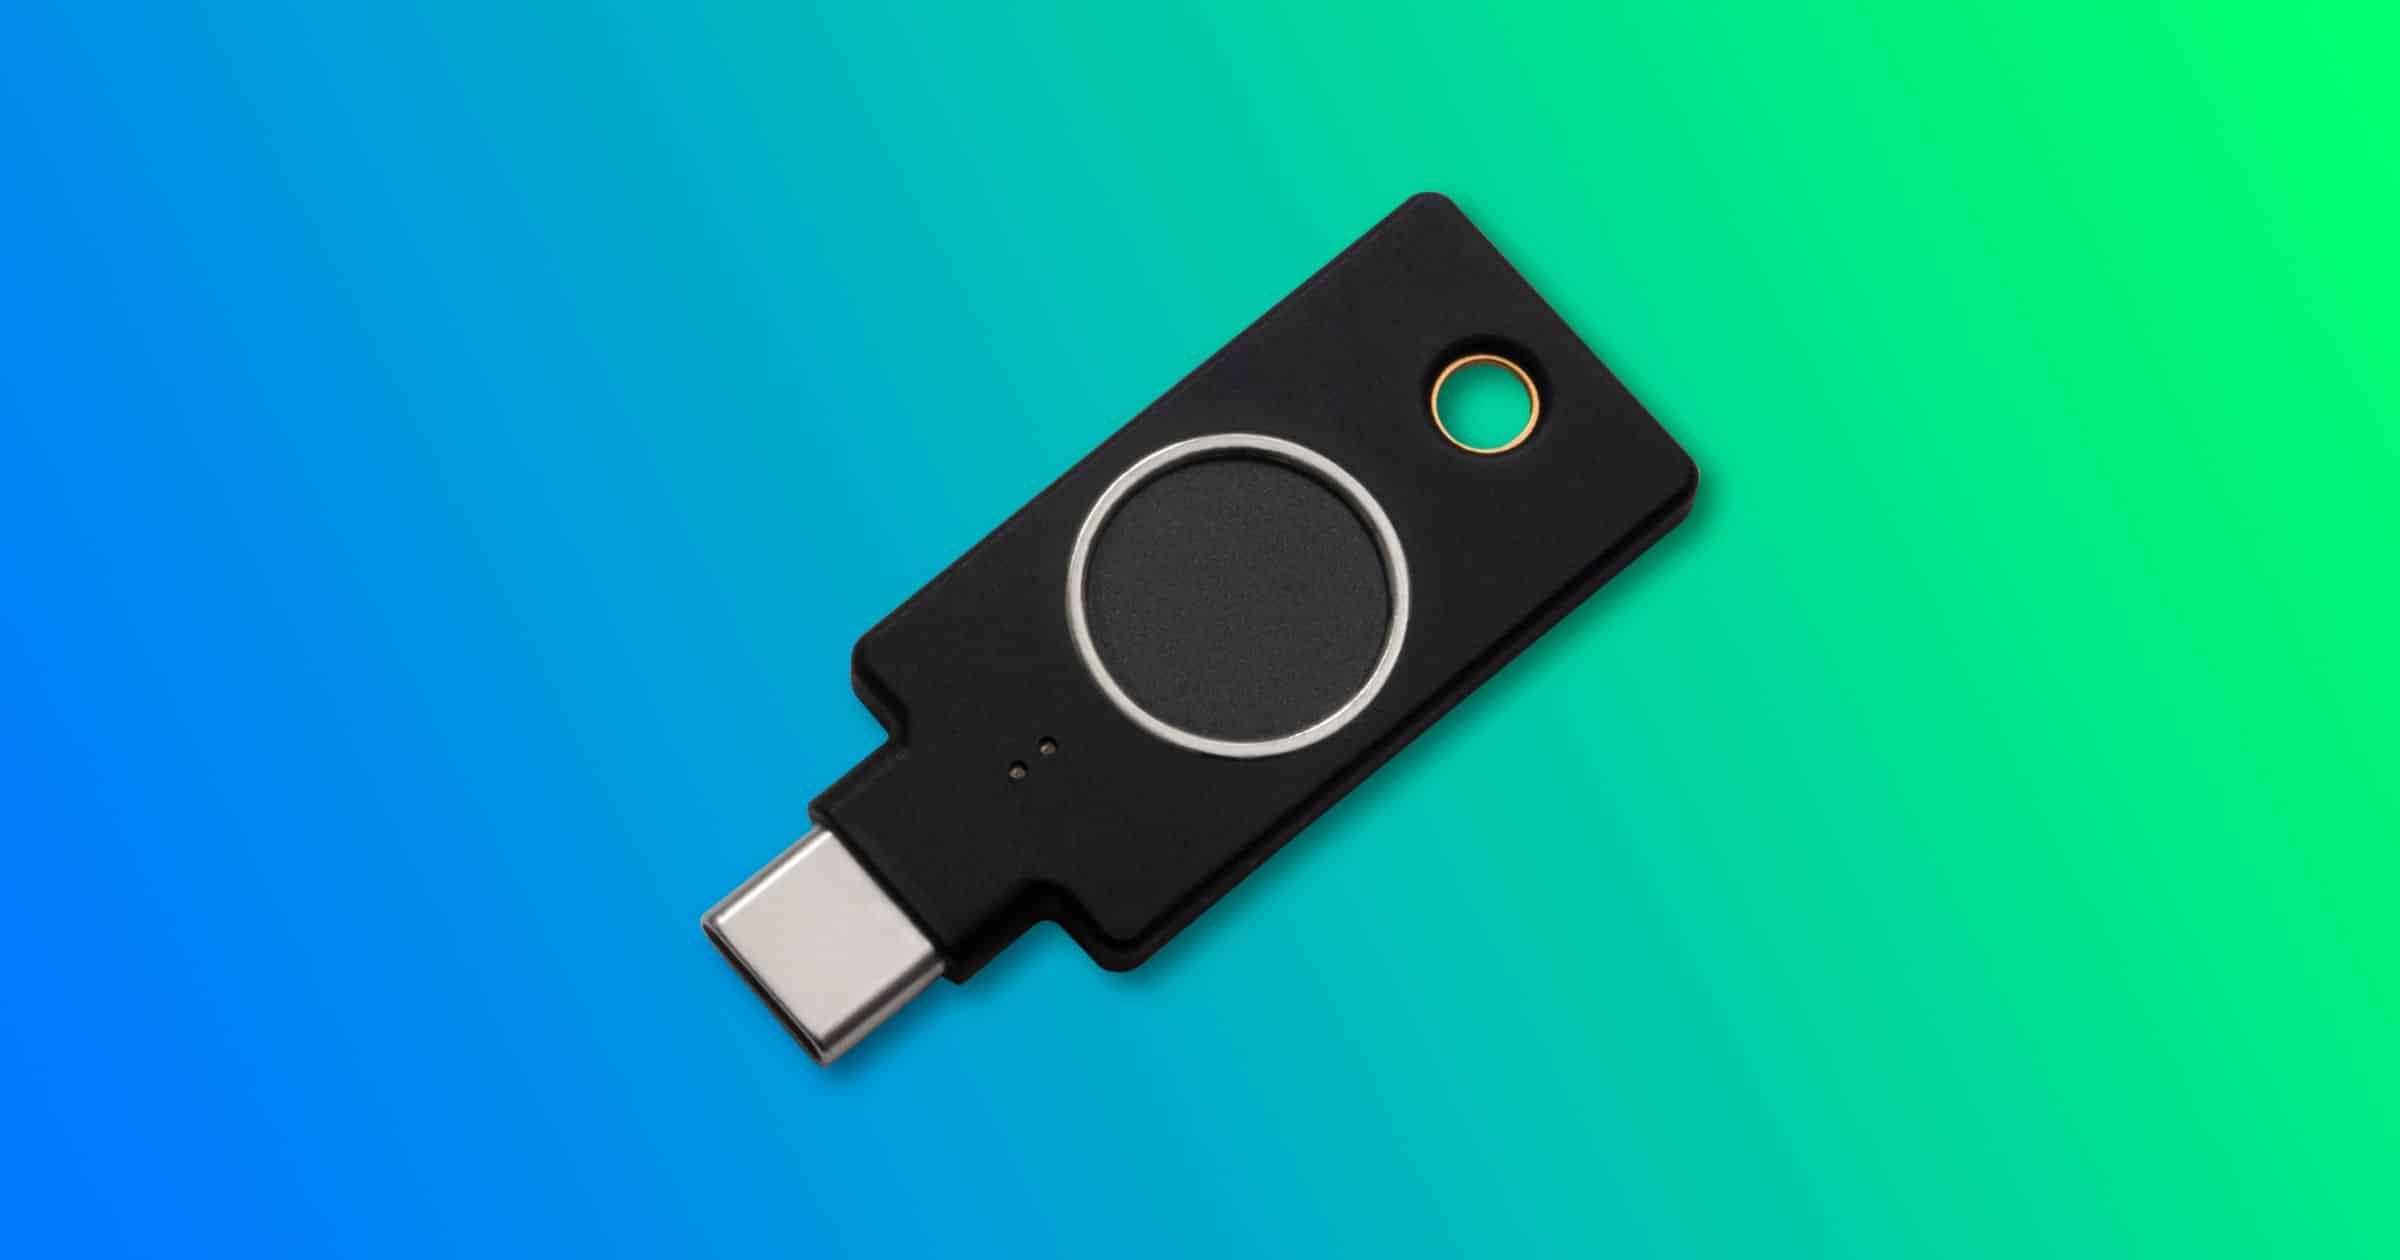 Yubico unveils its latest YubiKey 5C NFC security key, priced at $55